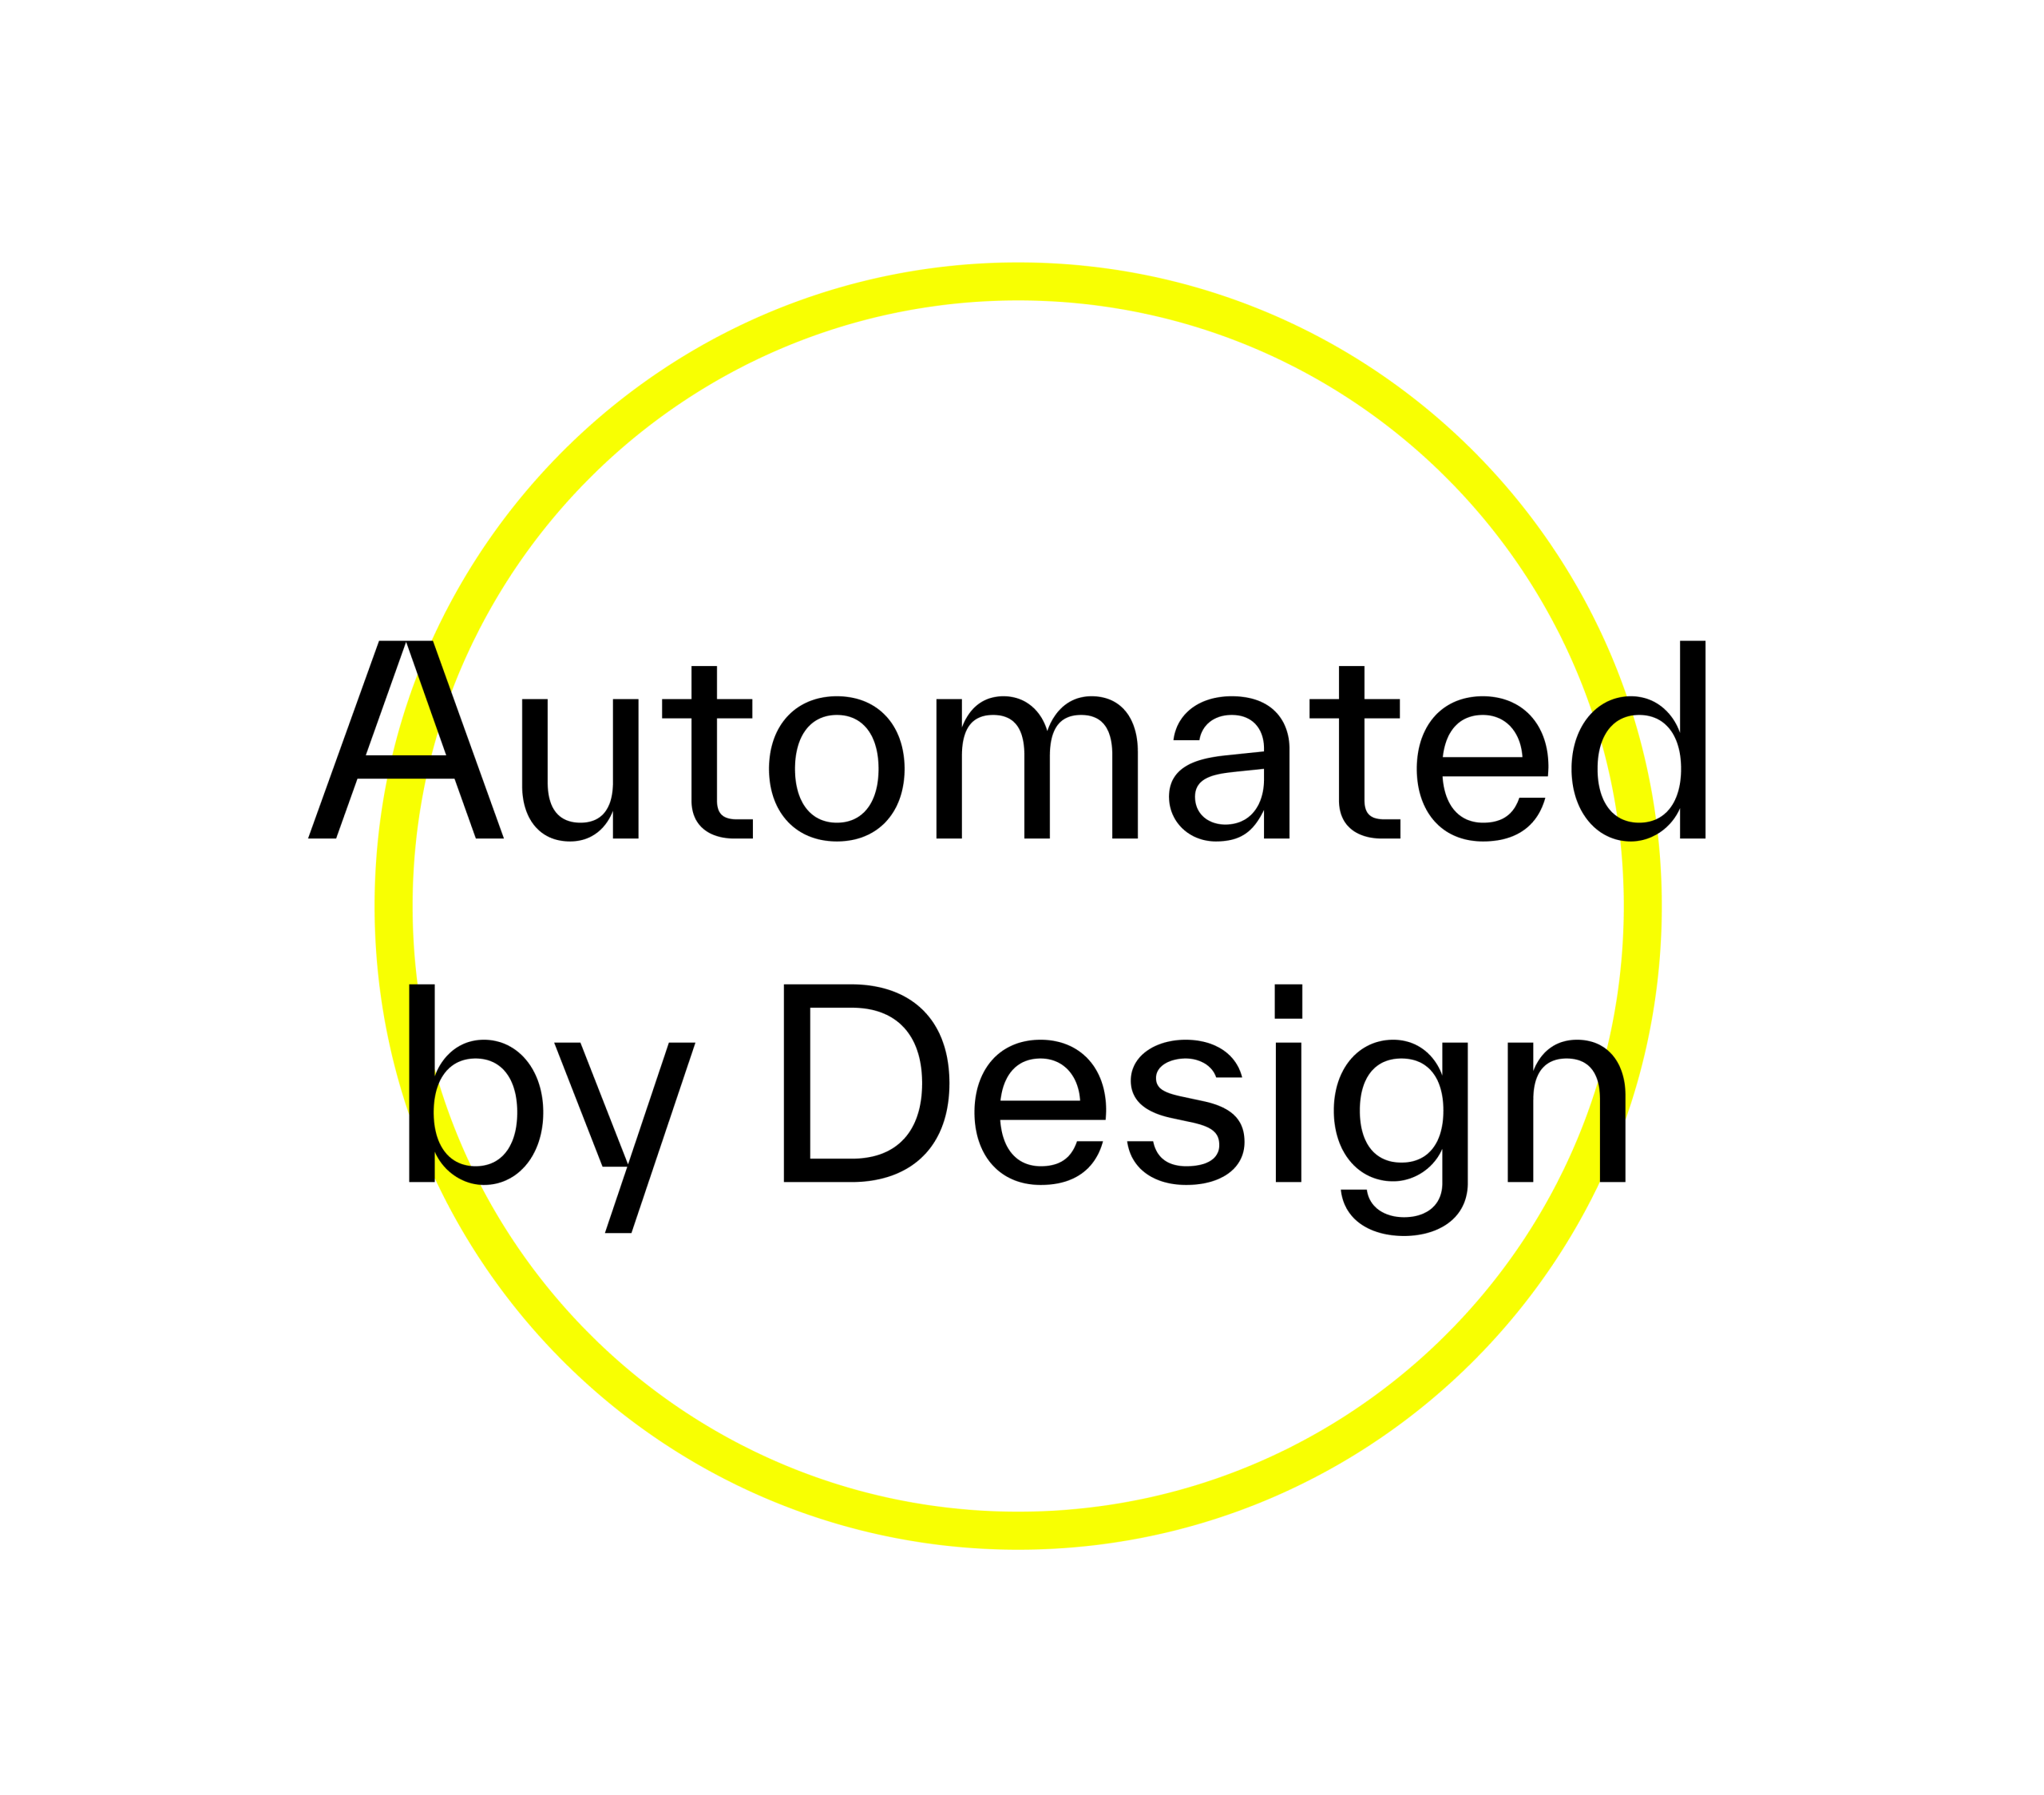 Automated by Design logo